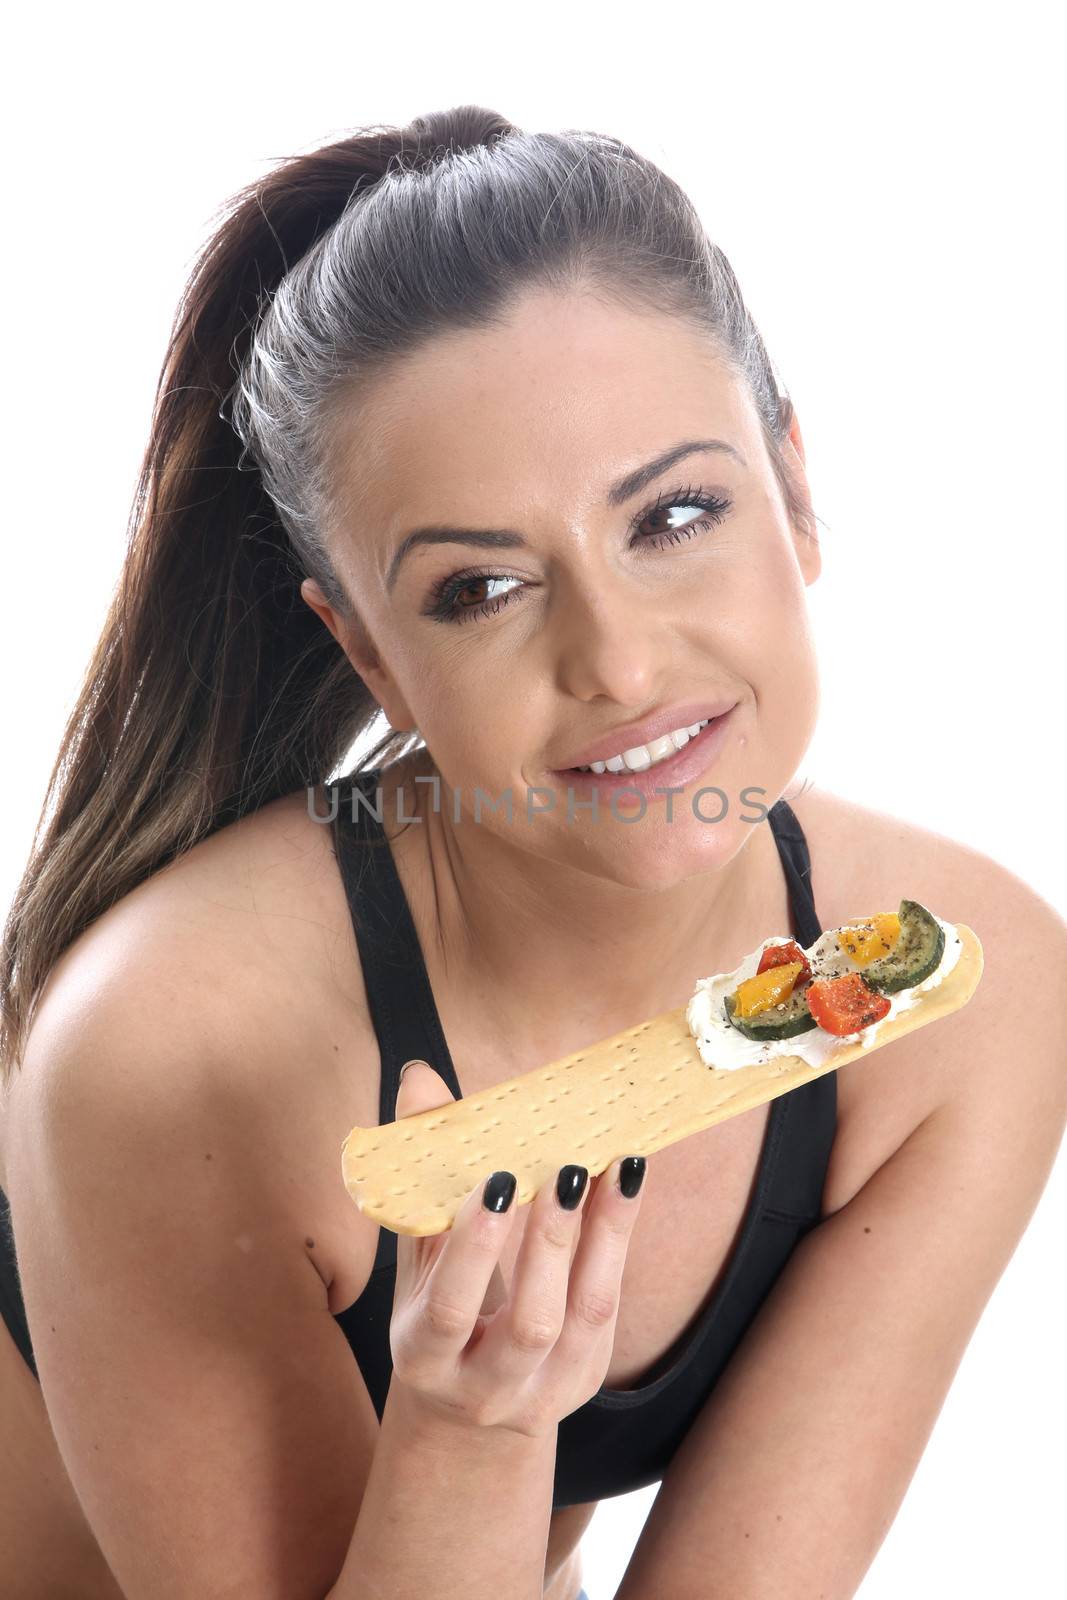 Model Released. Young woman Eating Flatbread with Roast Vegetables